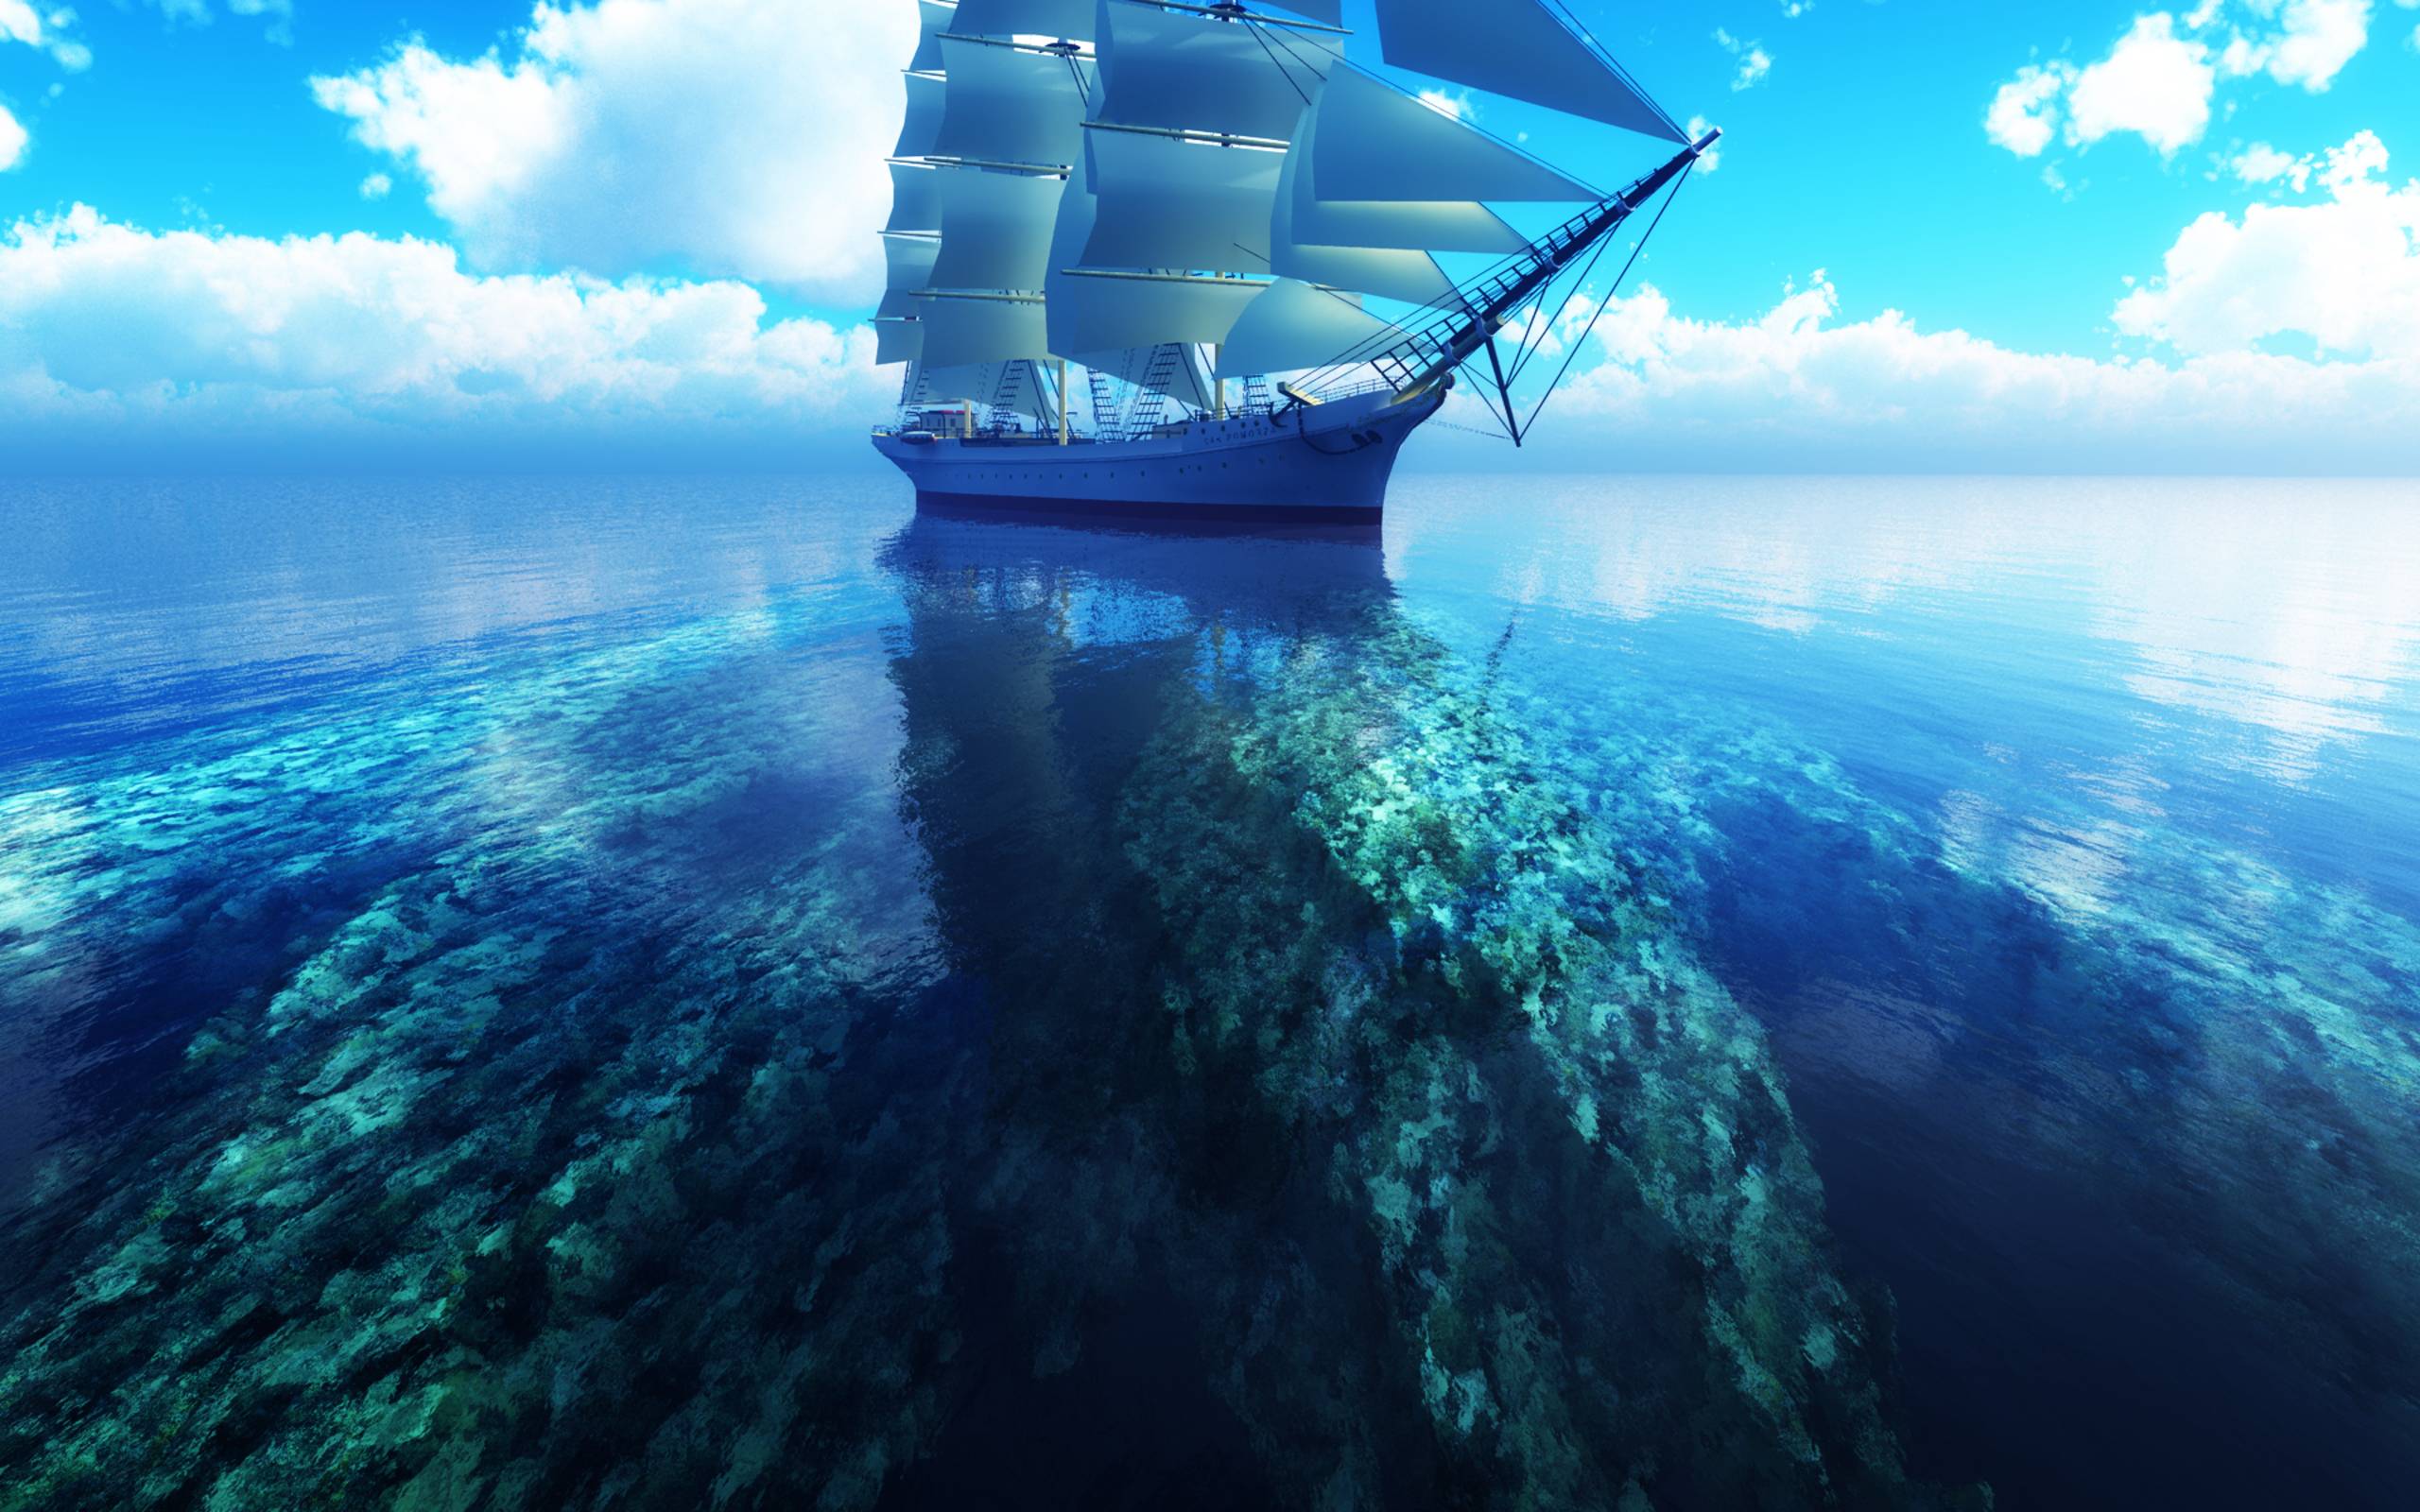 Ship Wallpaper Image in HD Available Here For Free Download